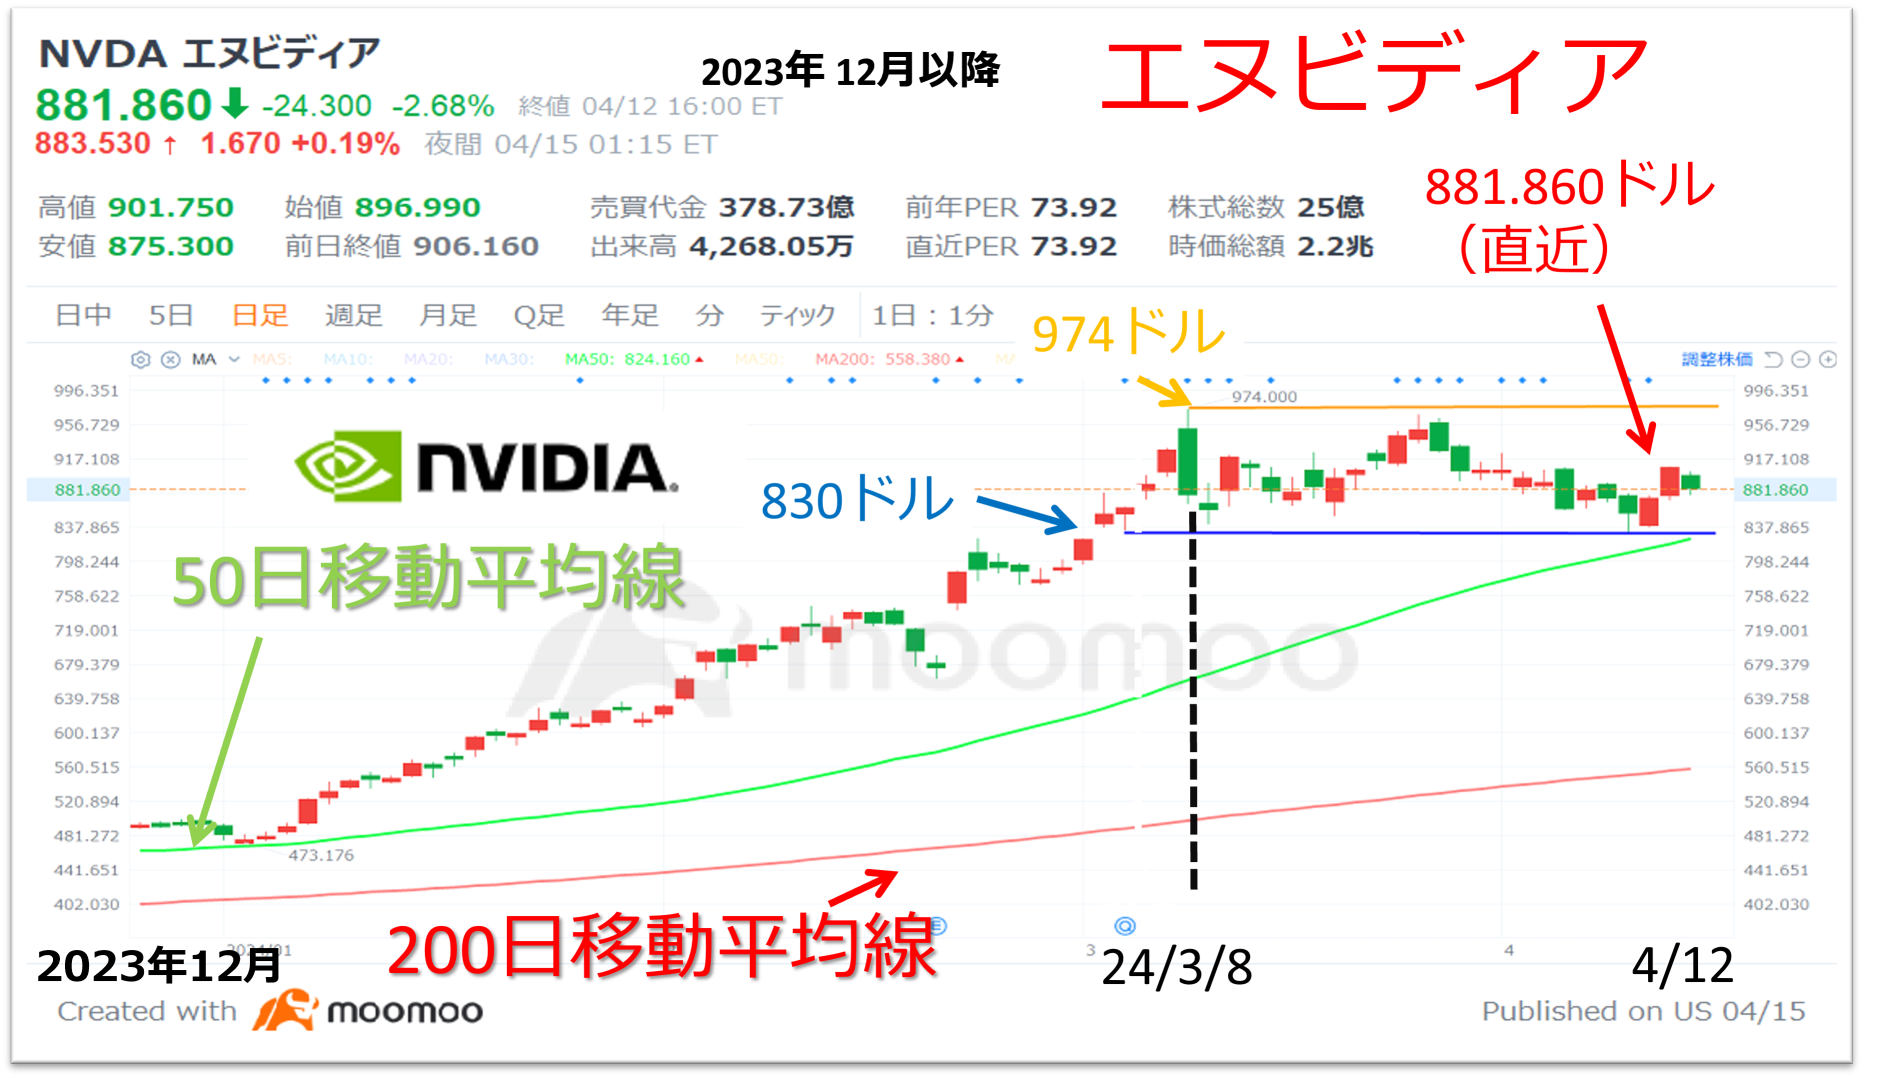 “NVIDIA's outlook and stock price analysis”